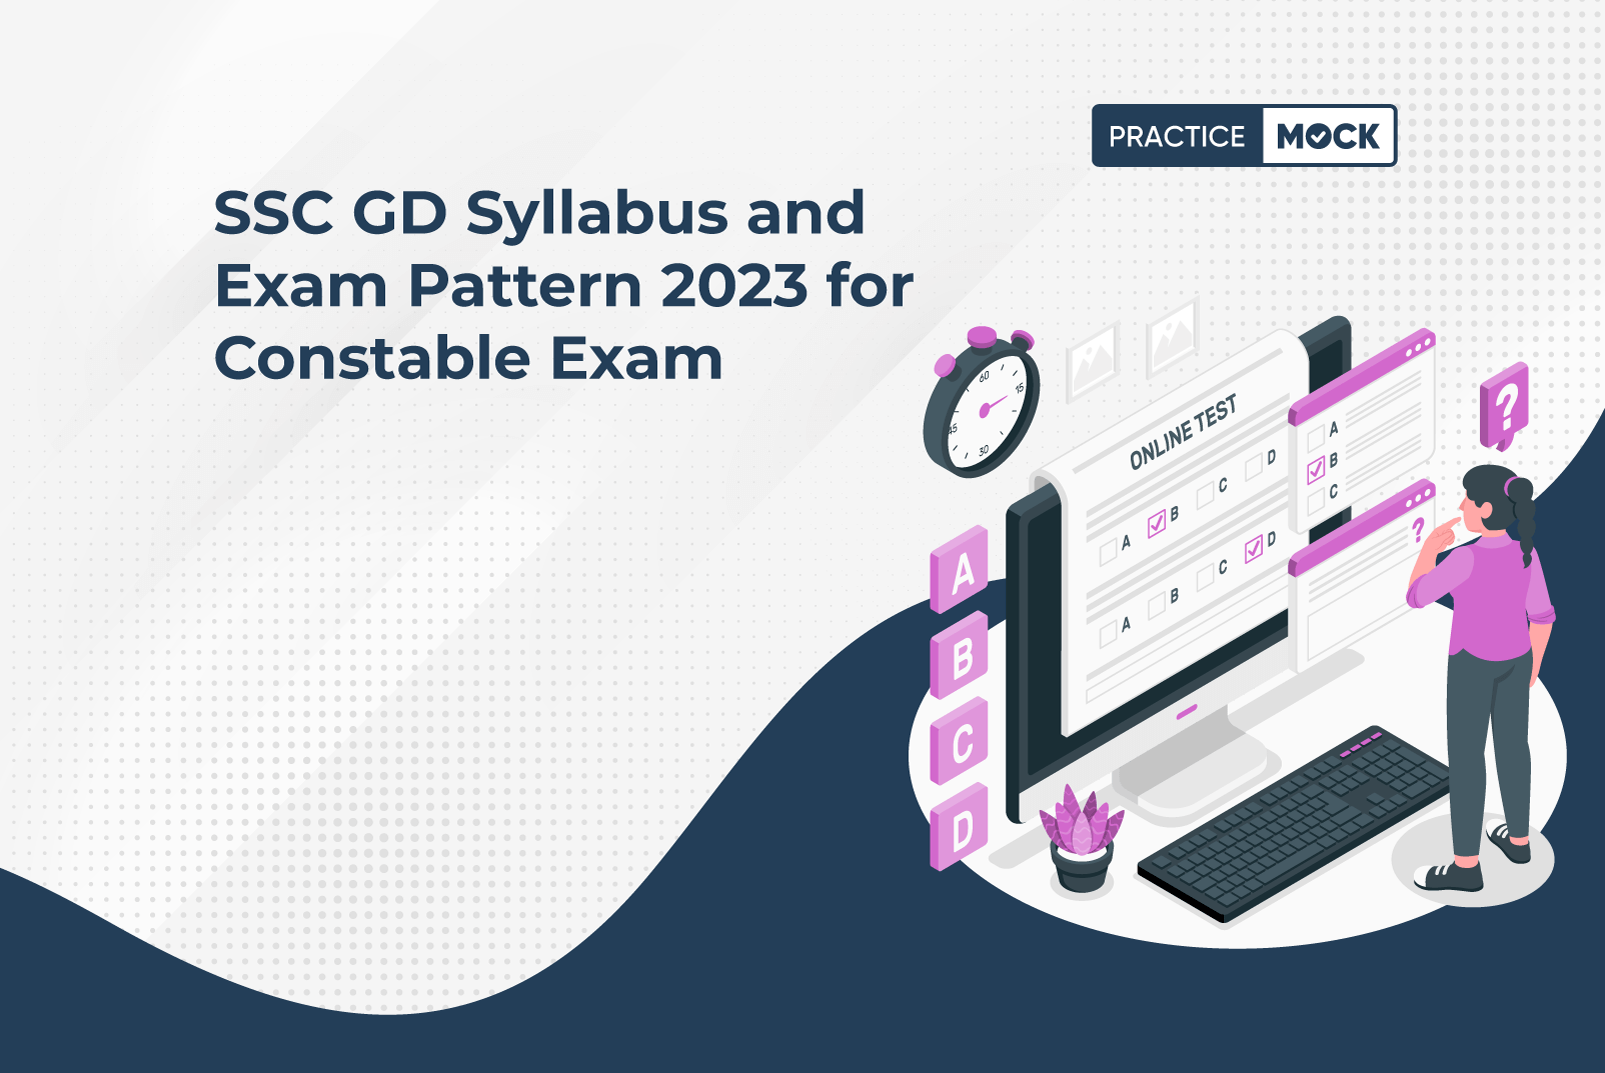 SSC GD Syllabus and Exam Pattern 2023 for Constable Exam (1)